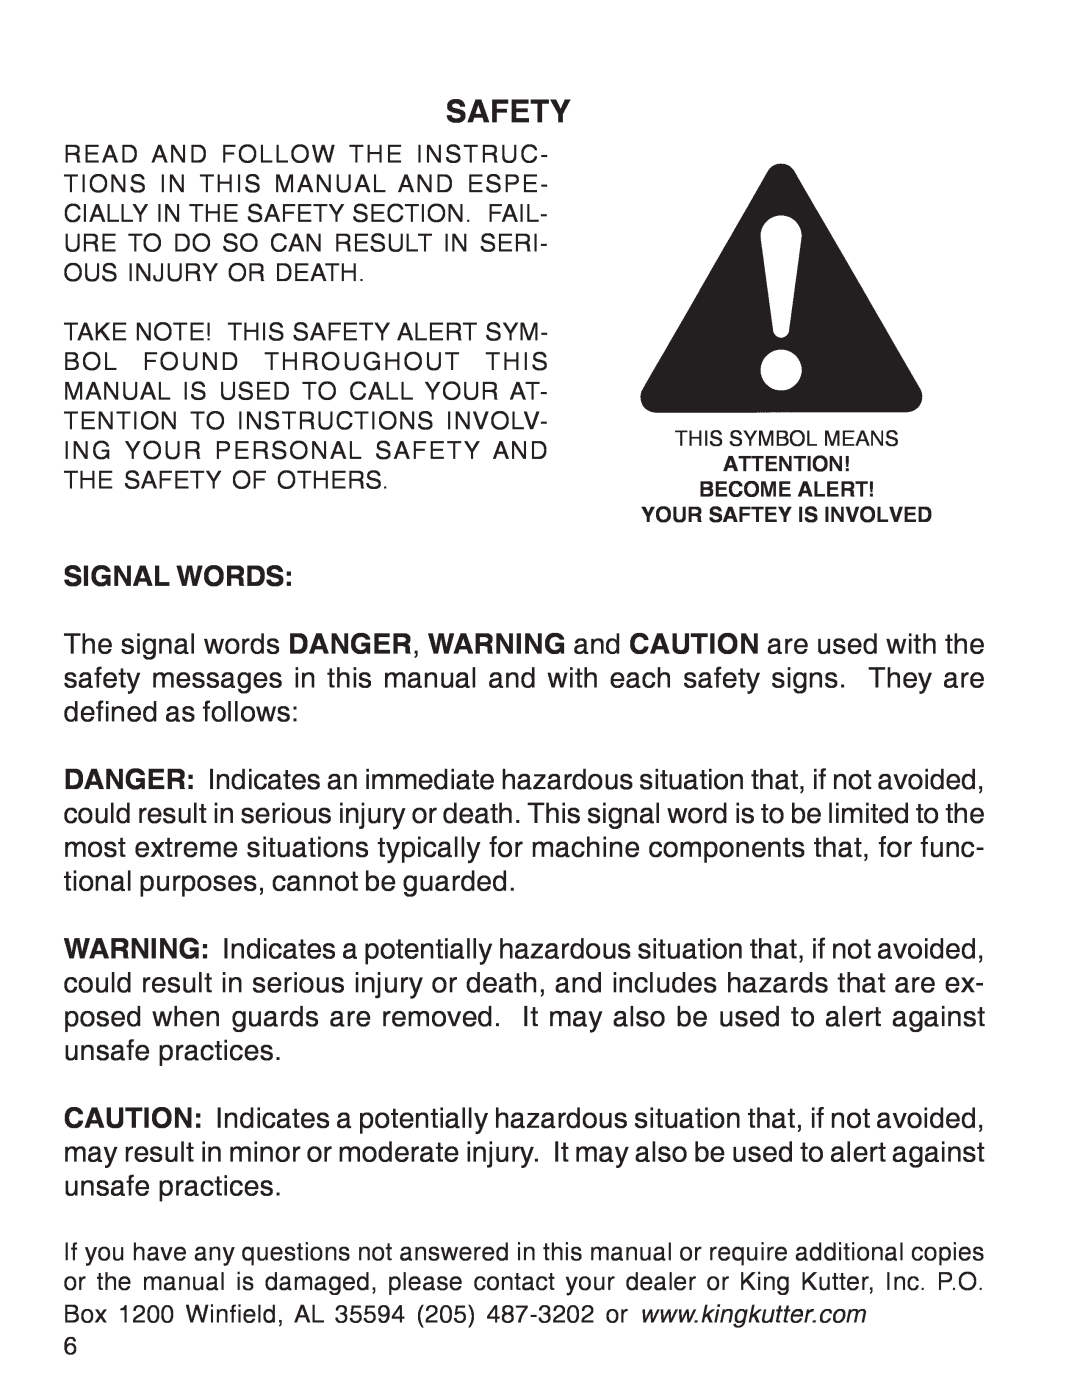 King Kutter Rotary Mower manual Safety, Signal Words 